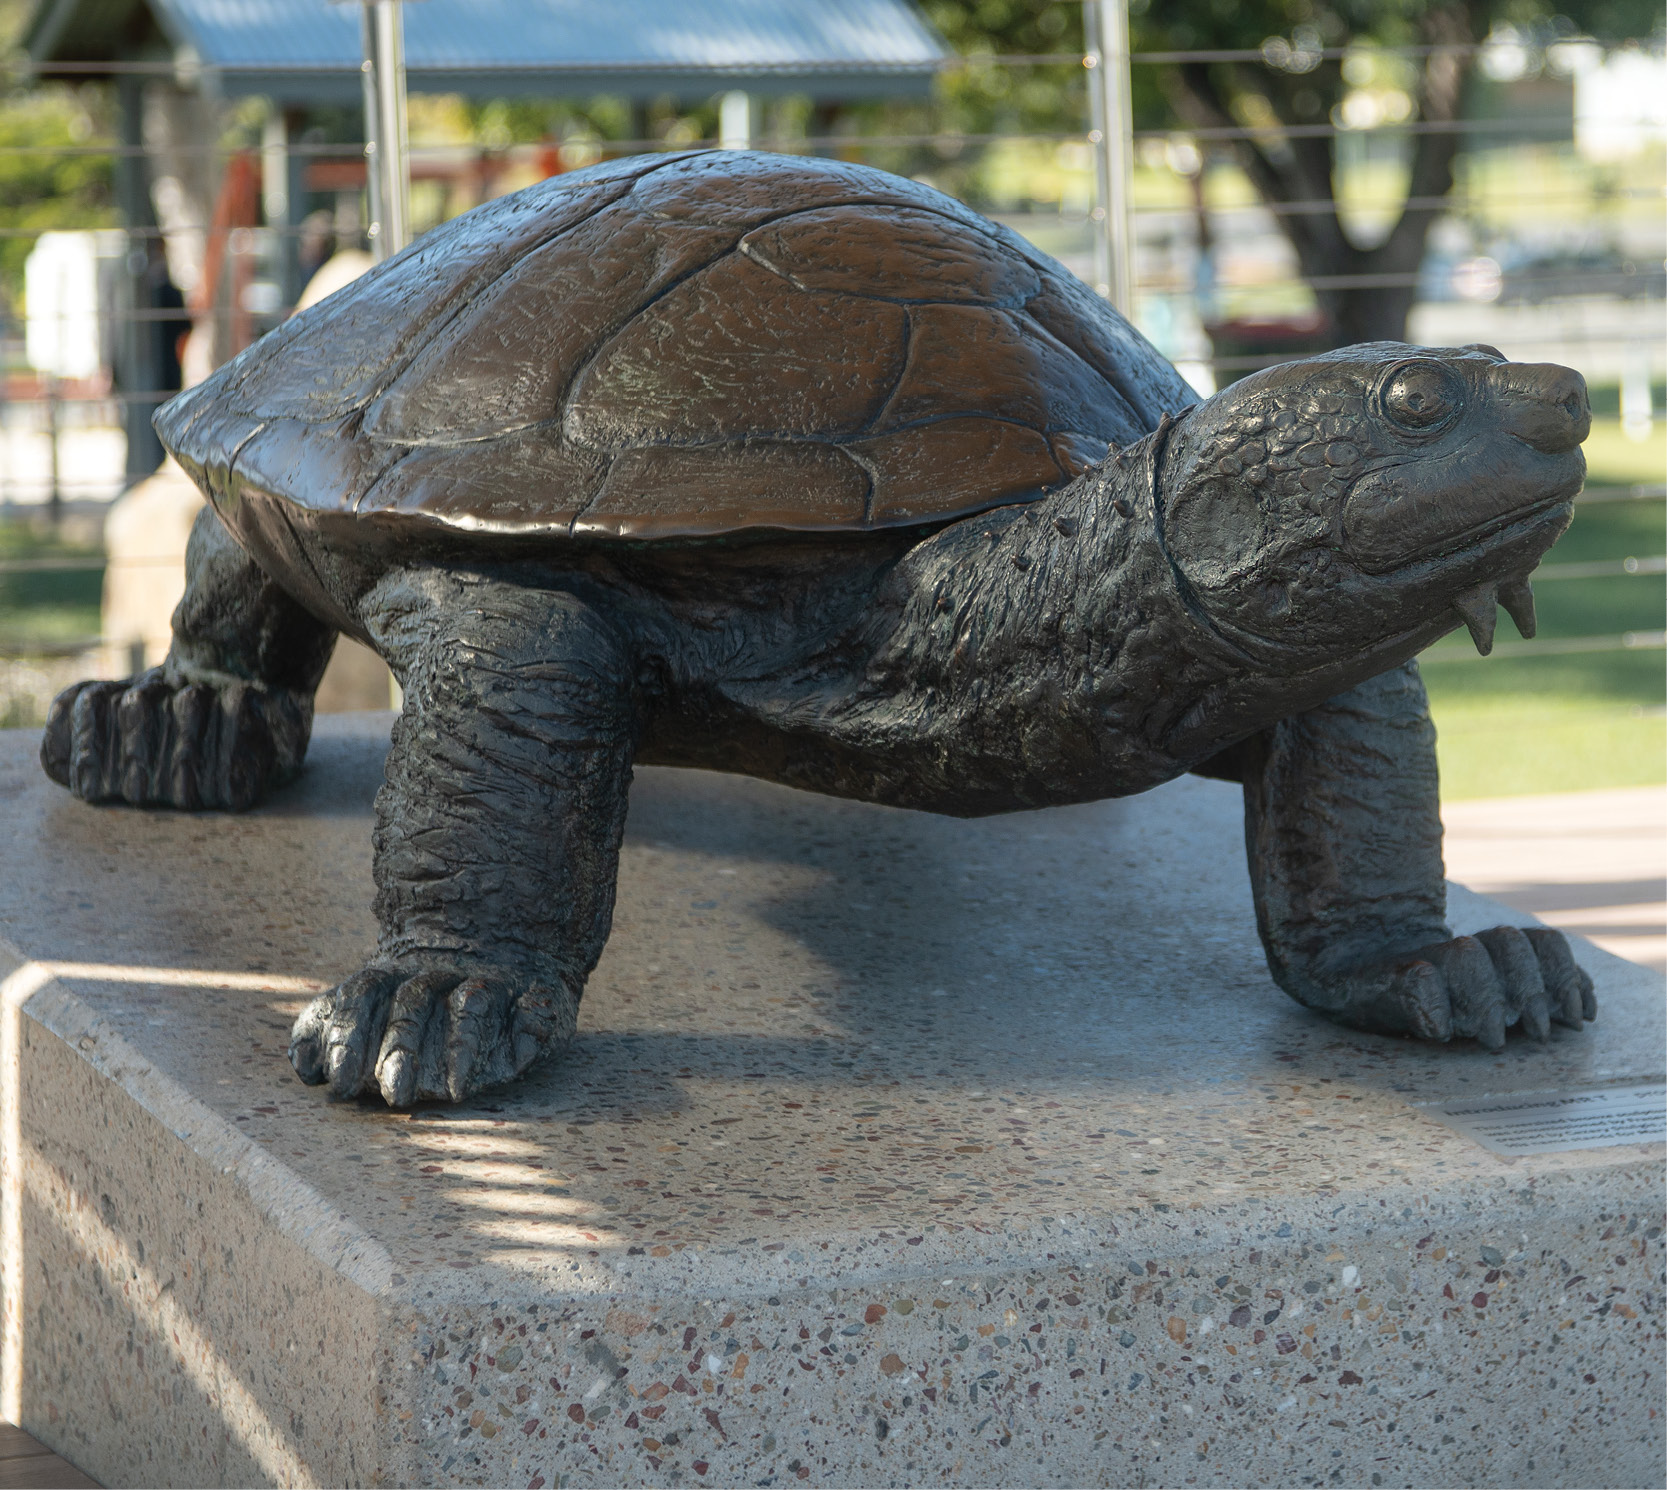 Public artwork by Cezary Stulgis, Mary River Turtle 2011, bronze sculpture.
Fraser Coast Regional Council Public Art Collection. Photo by Hayden Whittle.